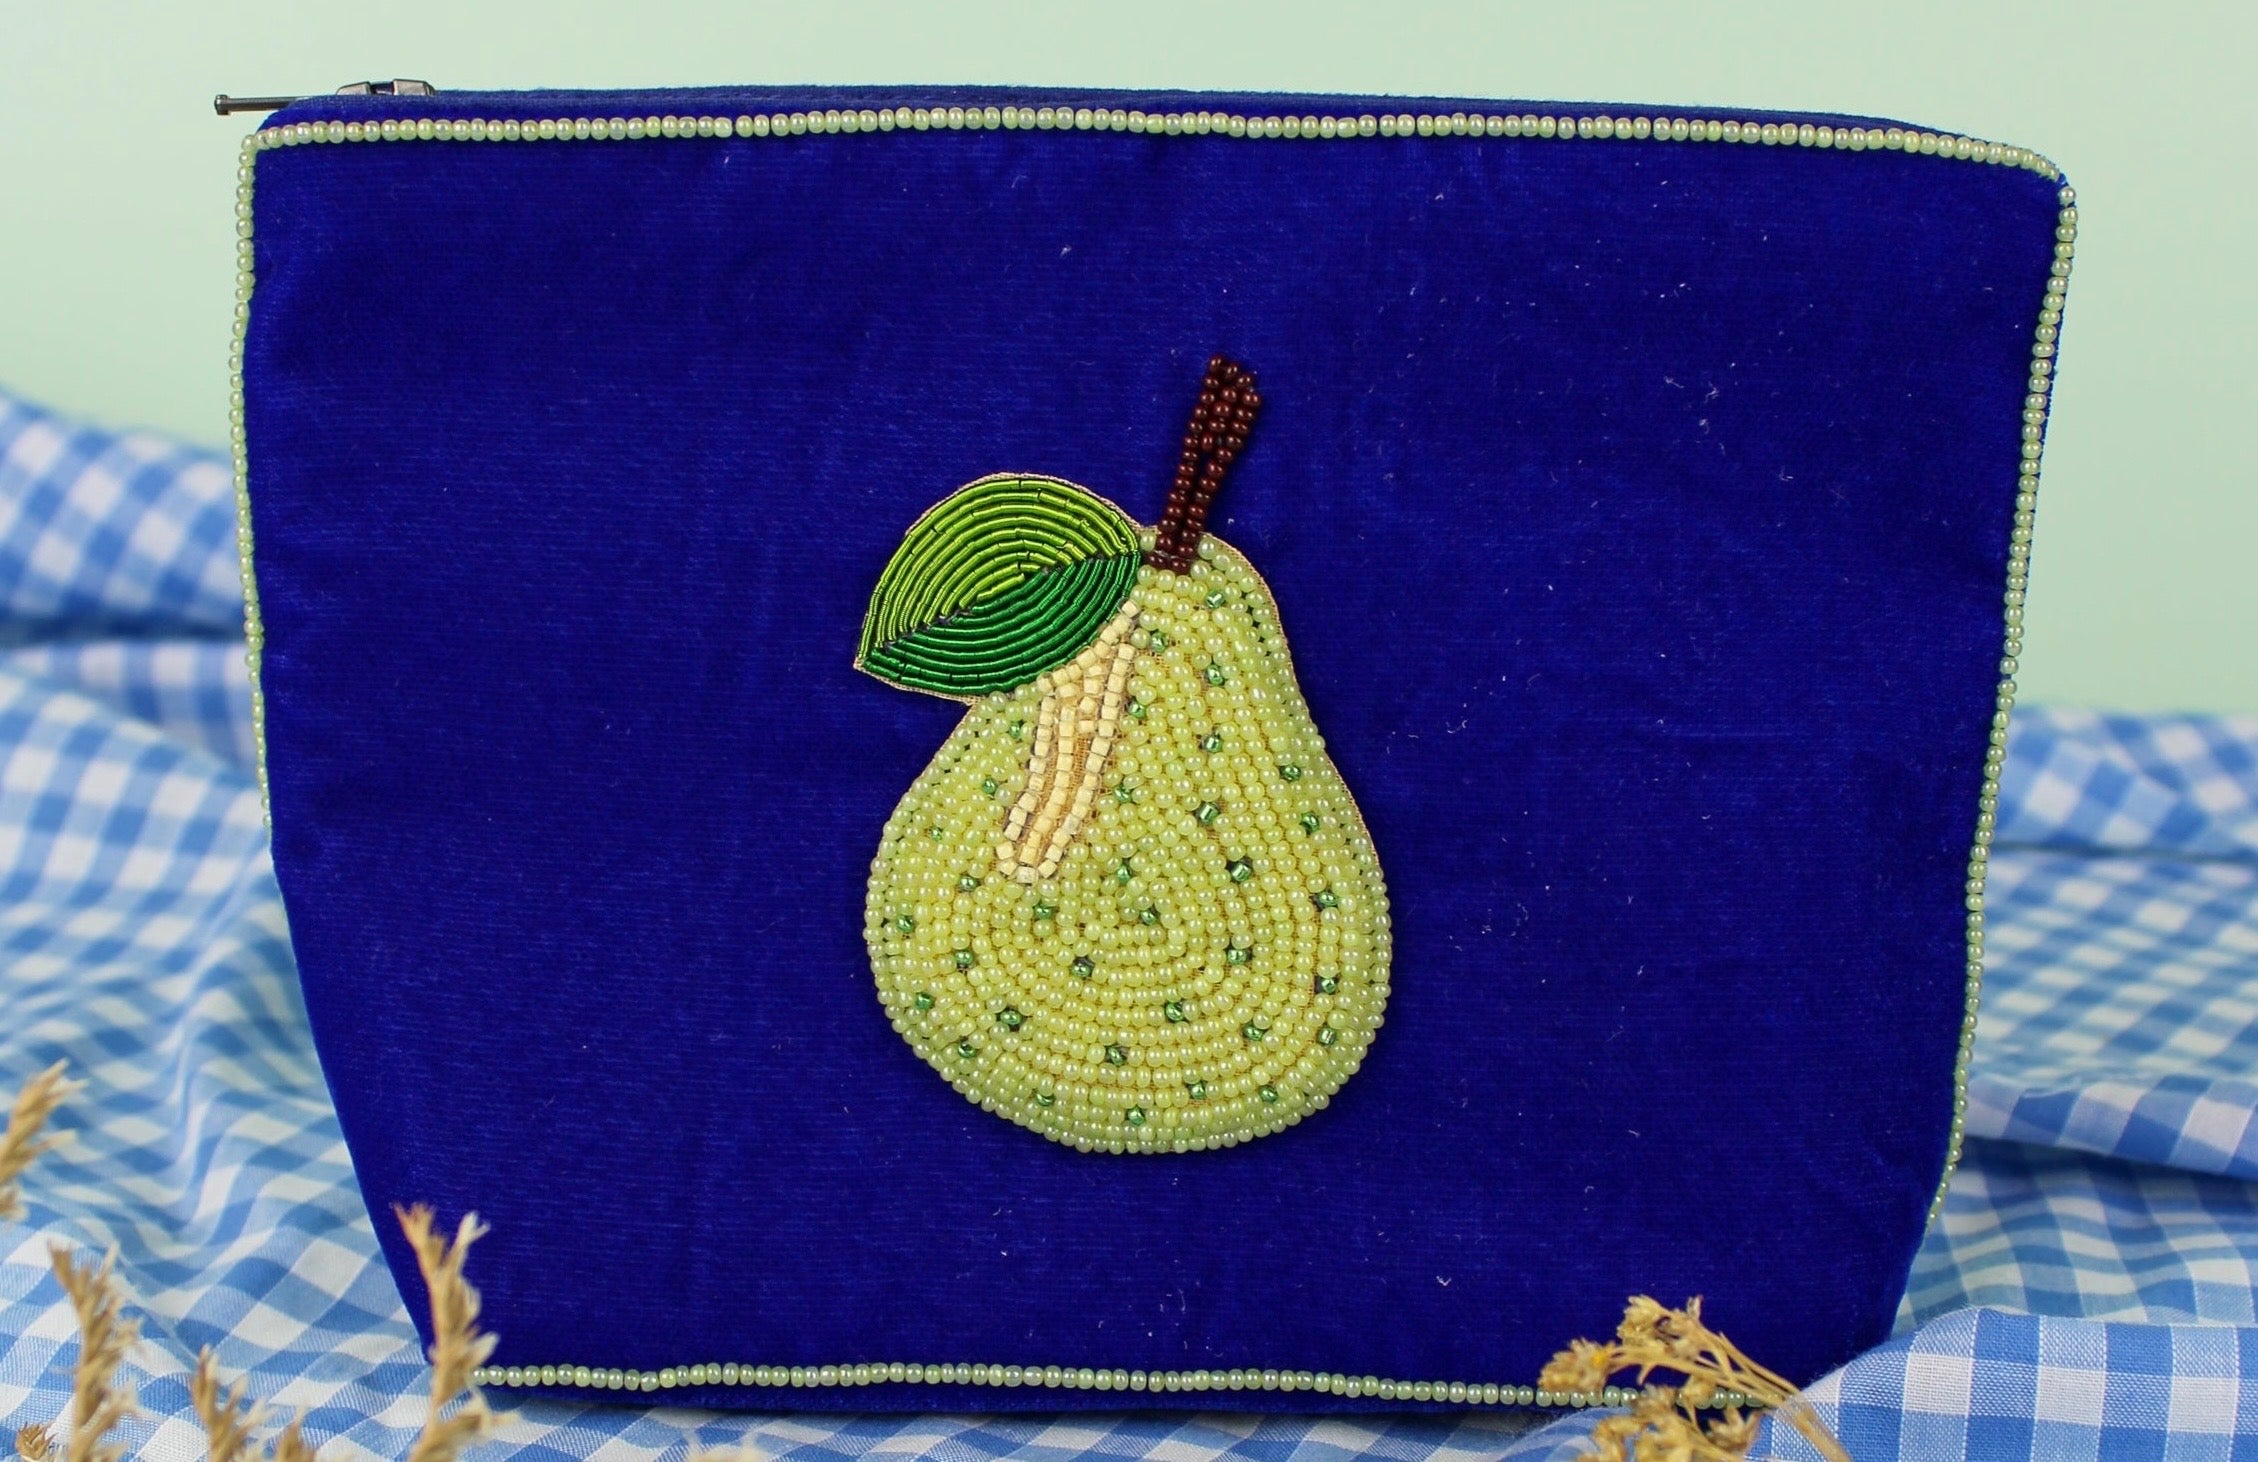 The Luxury Velvet Sapphire Blue Hand-beaded Cosmetic Bag with Pale Green Pear Design